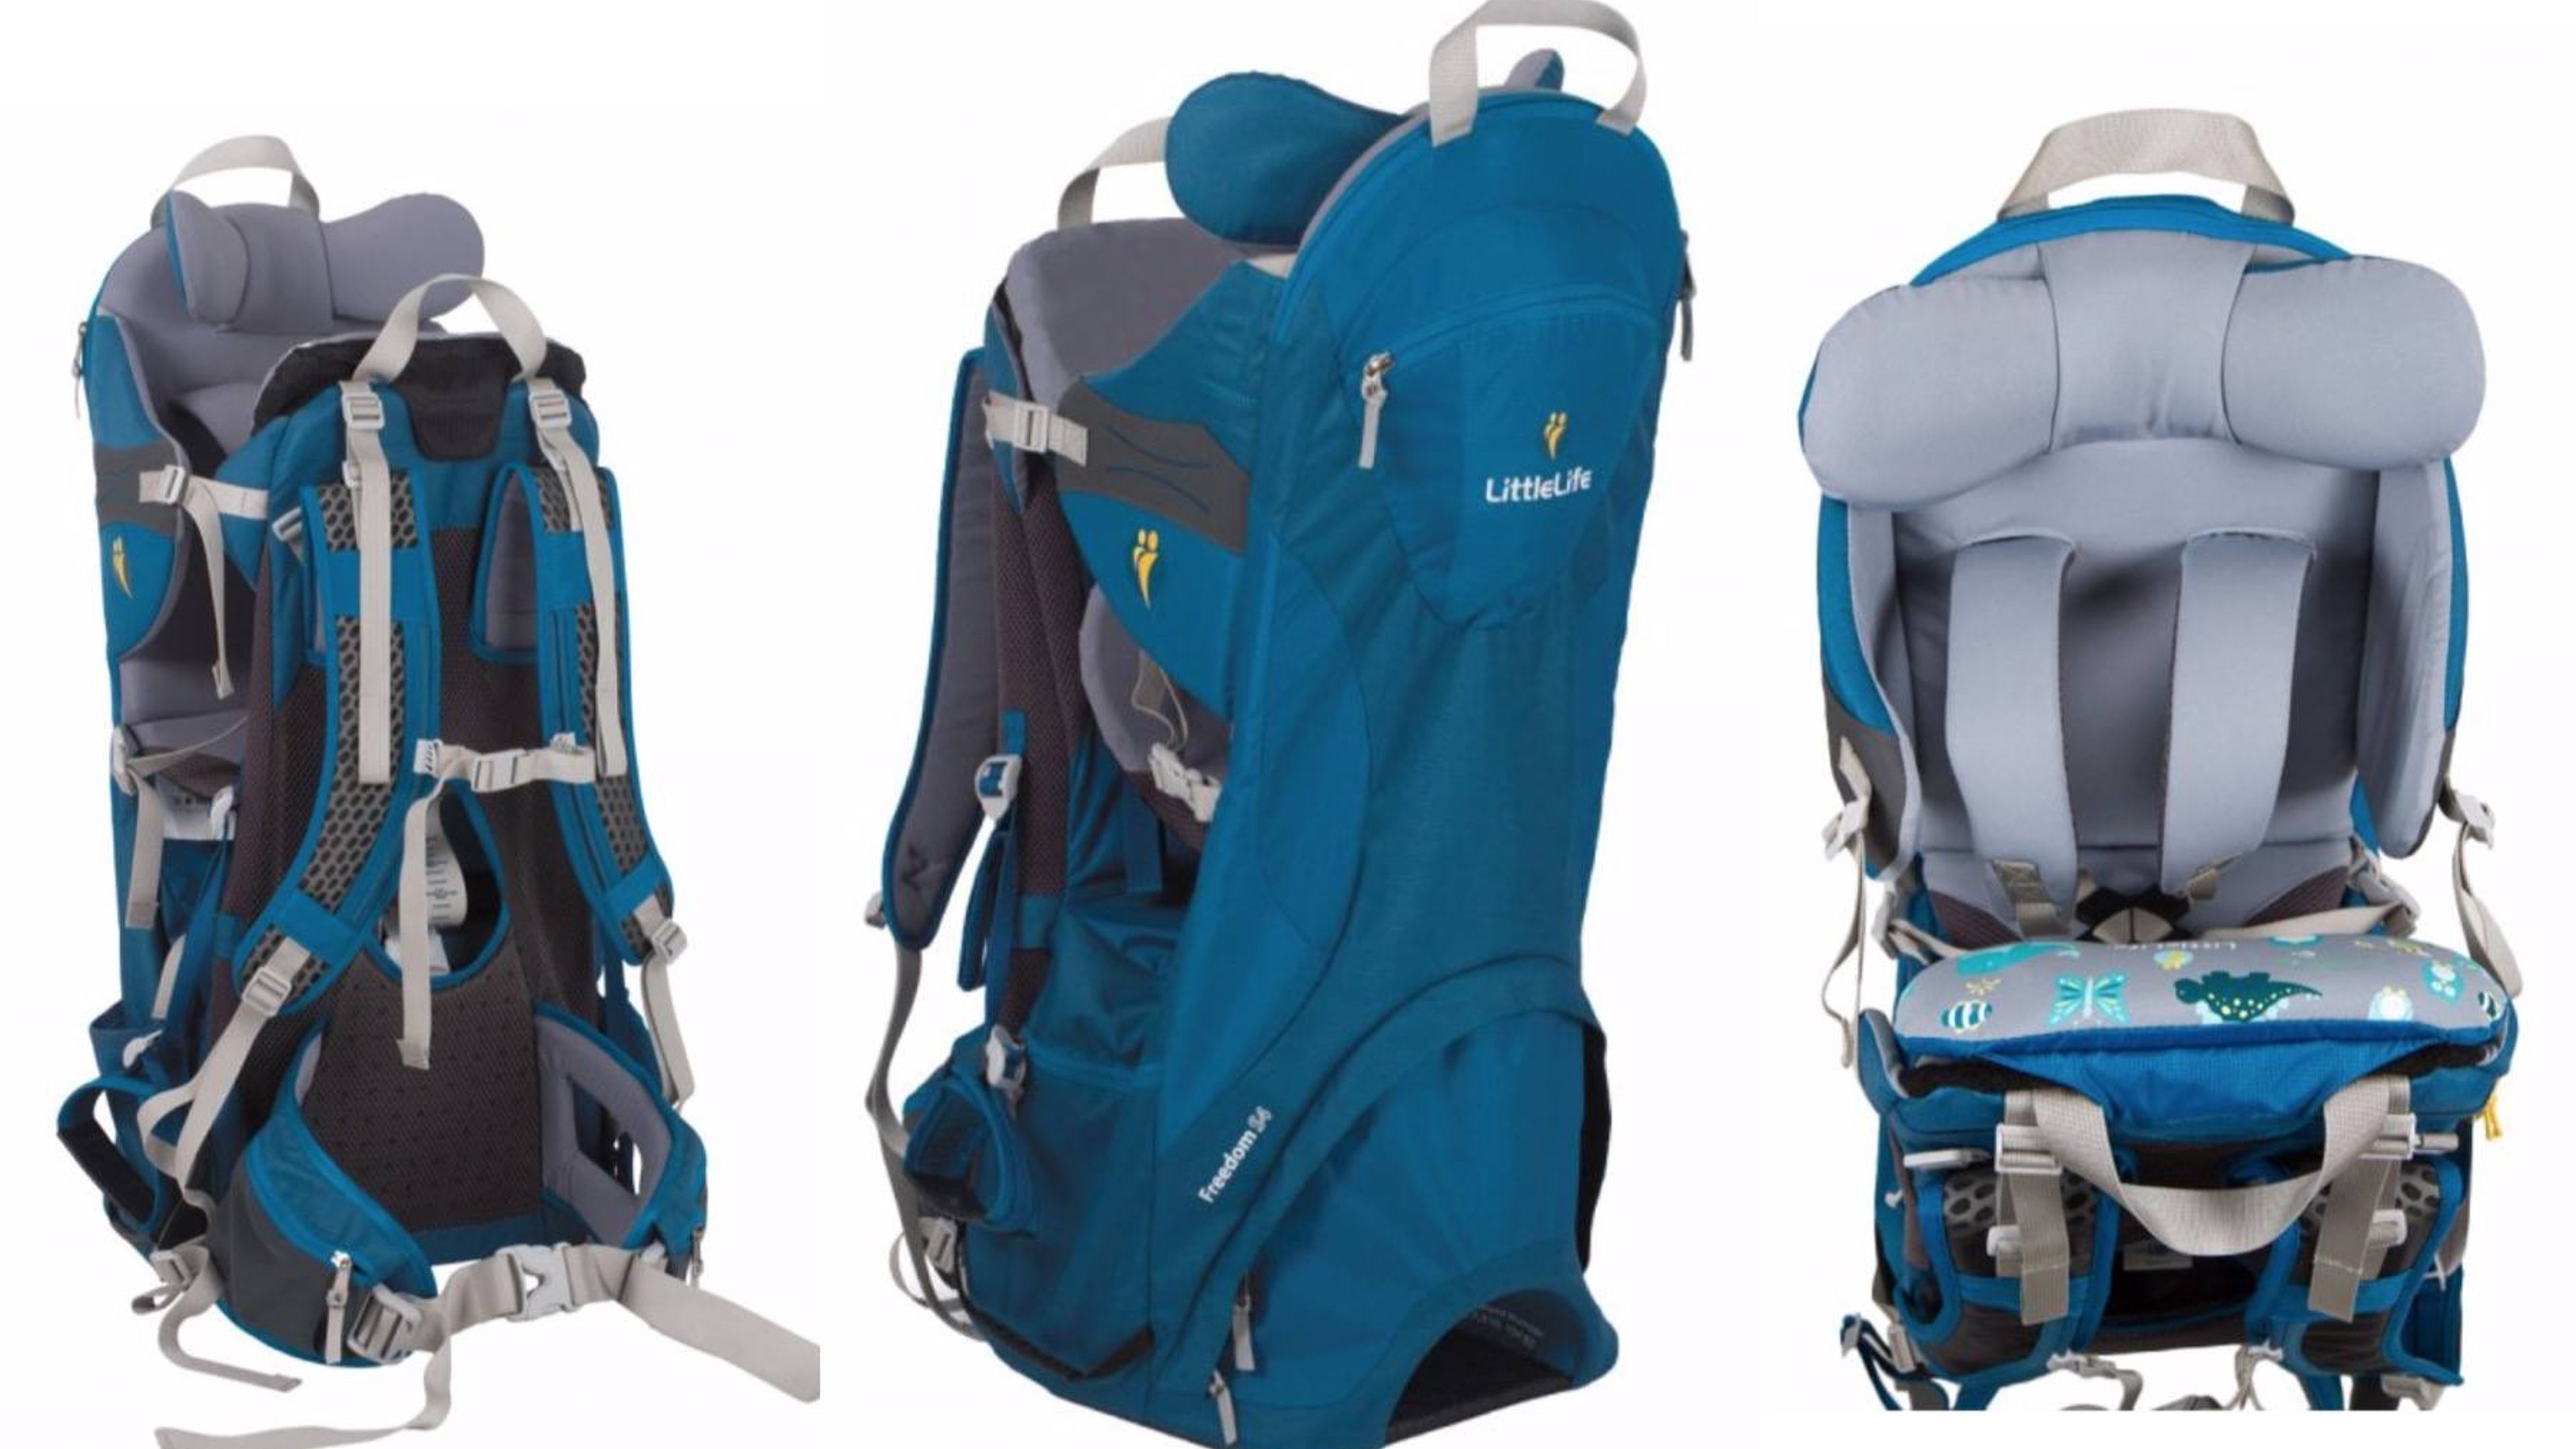 Littlelife Freedom Child Carrier Review